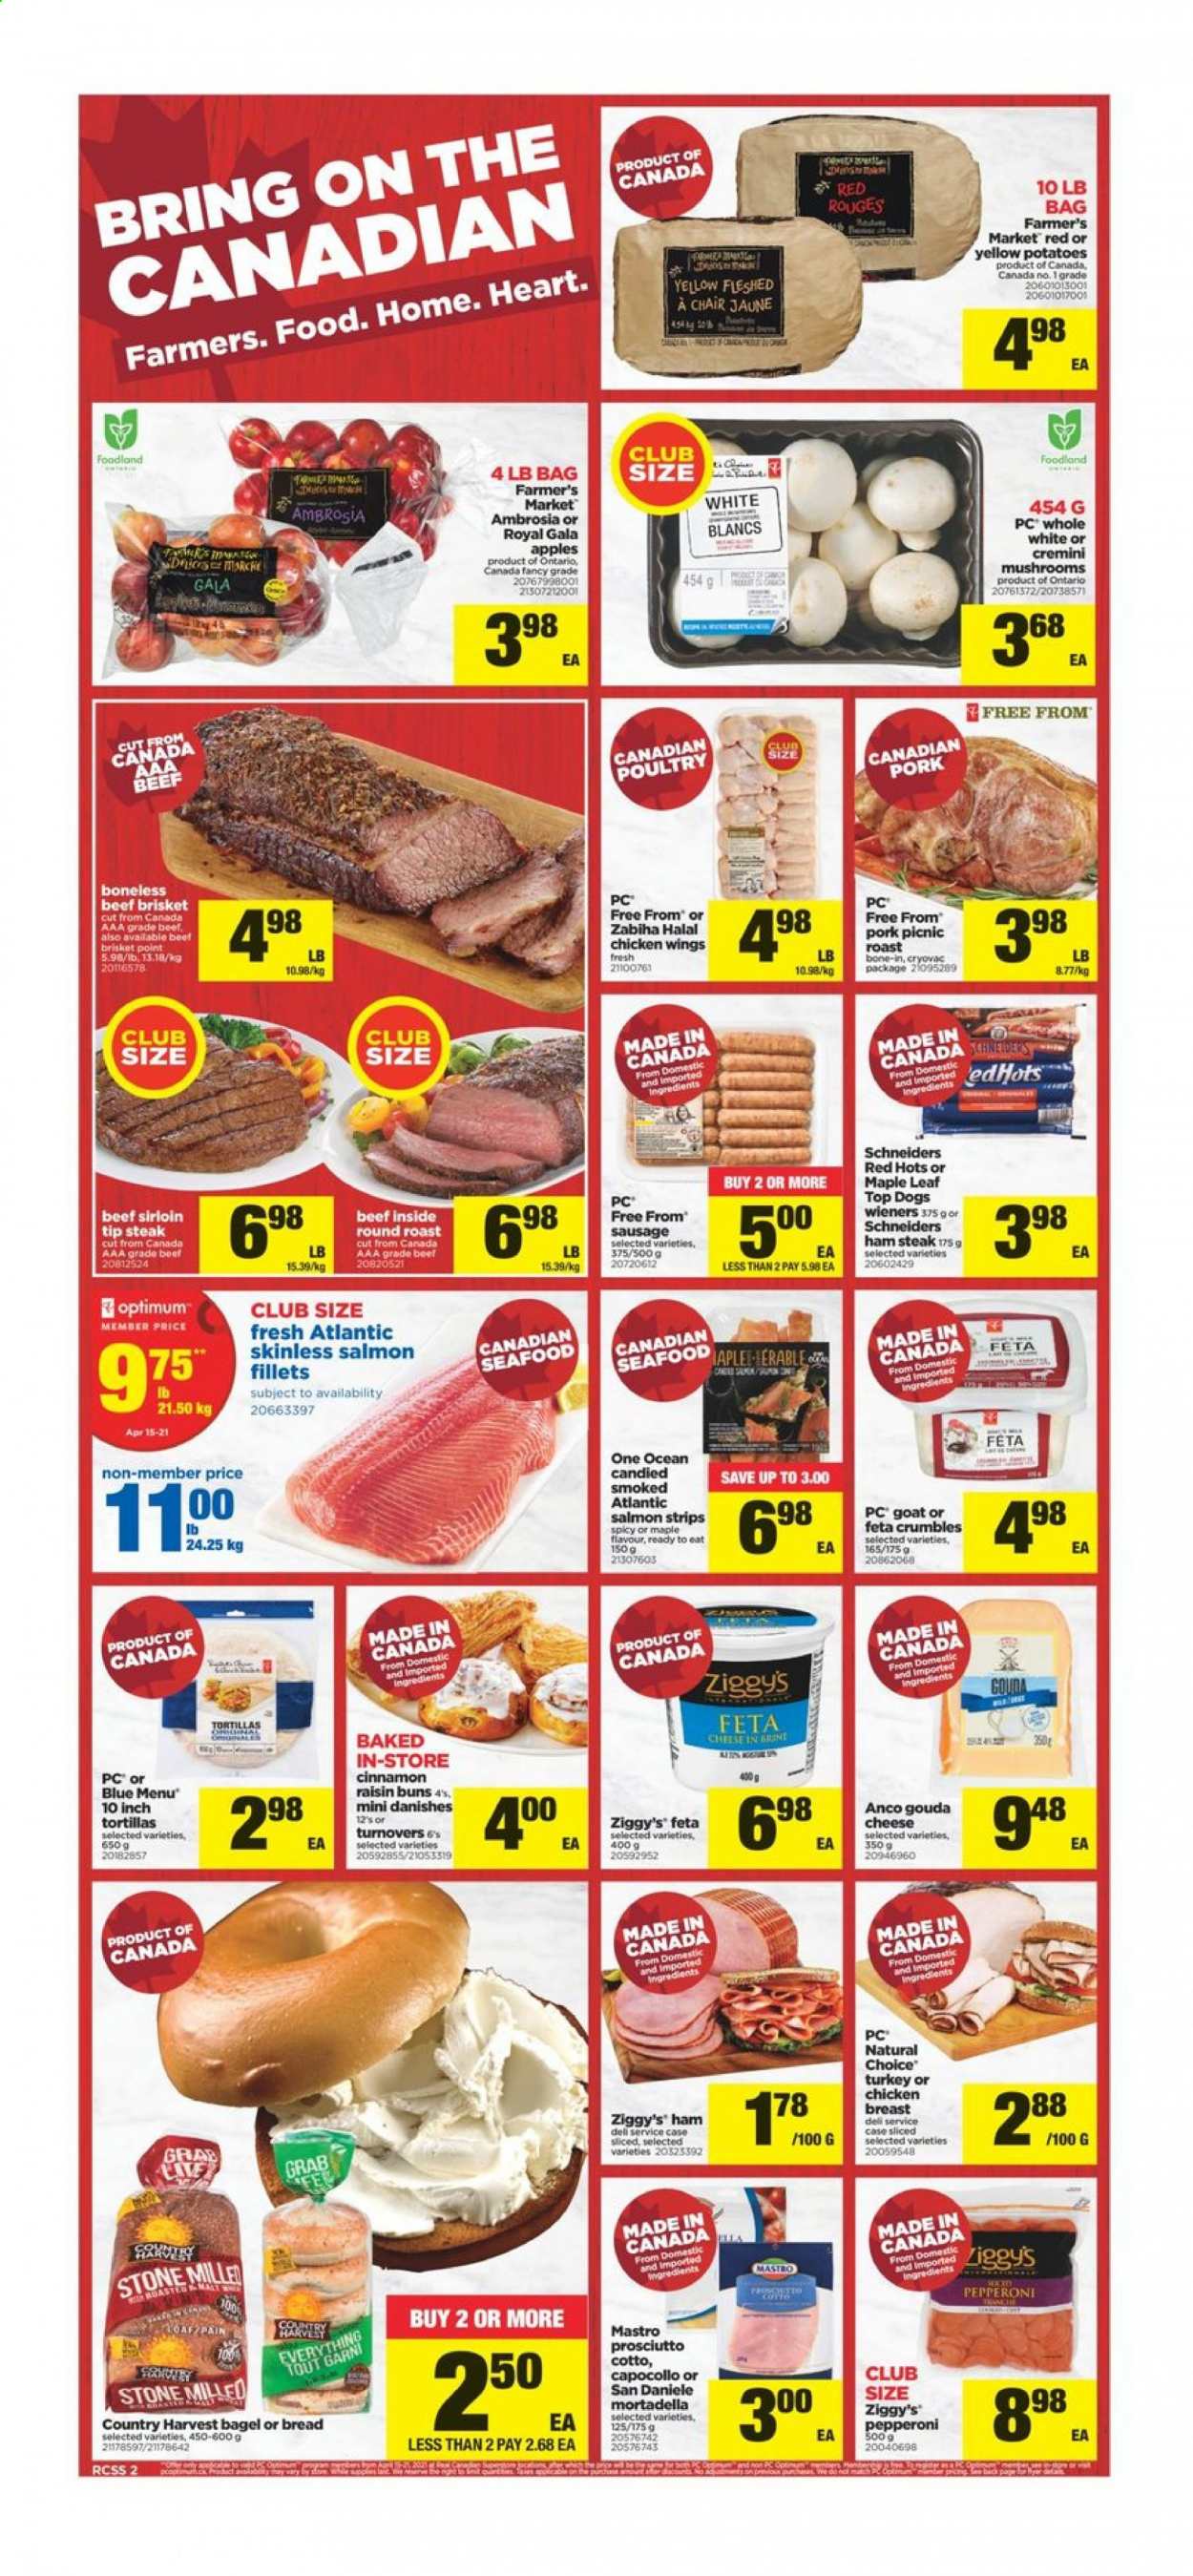 thumbnail - Real Canadian Superstore Flyer - April 15, 2021 - April 21, 2021 - Sales products - bagels, tortillas, buns, turnovers, potatoes, apples, Gala, salmon, salmon fillet, mortadella, ham, prosciutto, sausage, pepperoni, ham steaks, gouda, cheese, feta, Country Harvest, chicken wings, beef meat, beef sirloin, round roast, beef brisket, Optimum, chair, steak. Page 3.